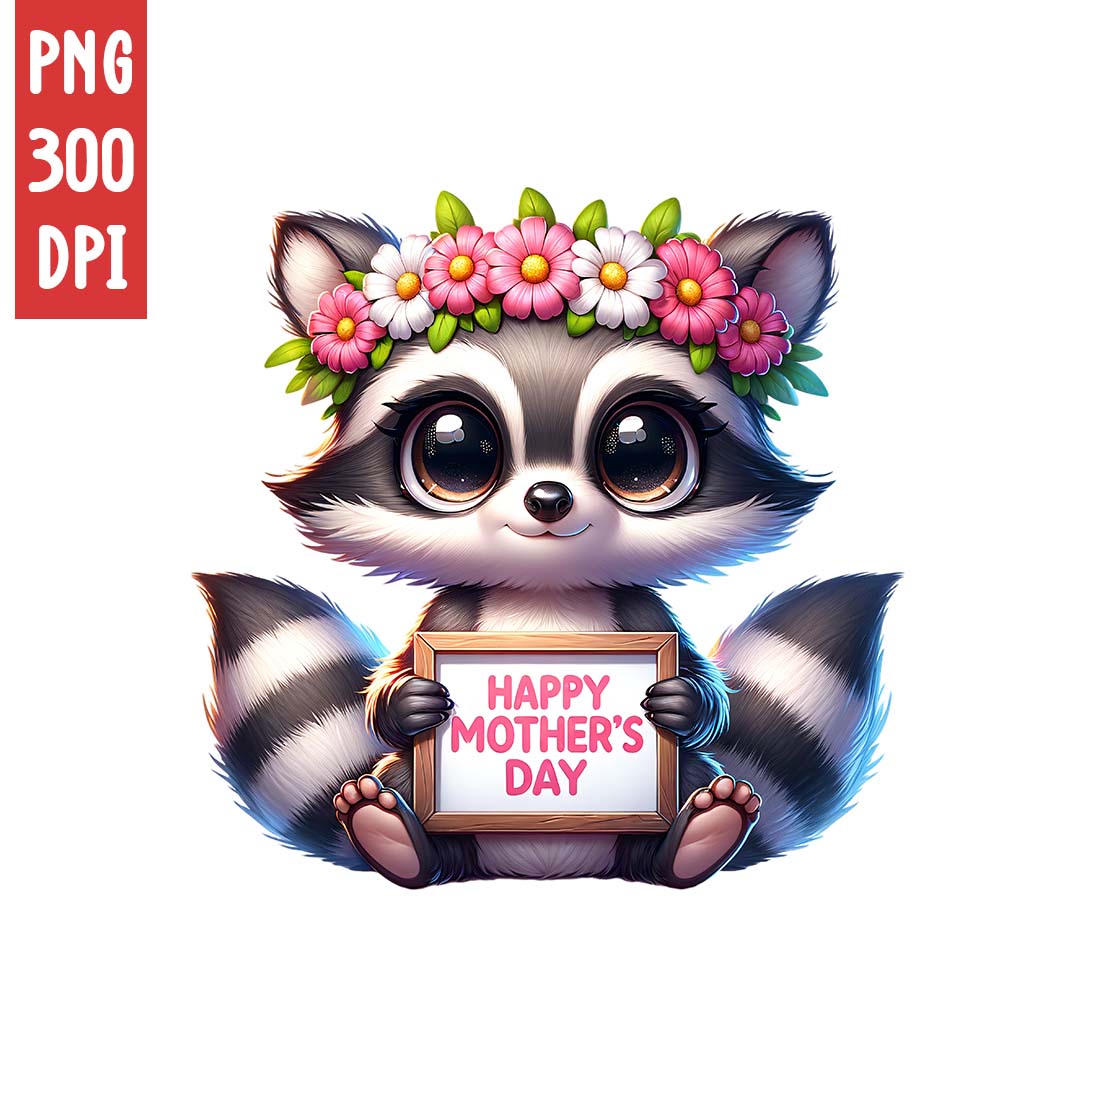 Mother's Day Animal Clipart | Cute Raccoon with frame clipart | PNG cover image.